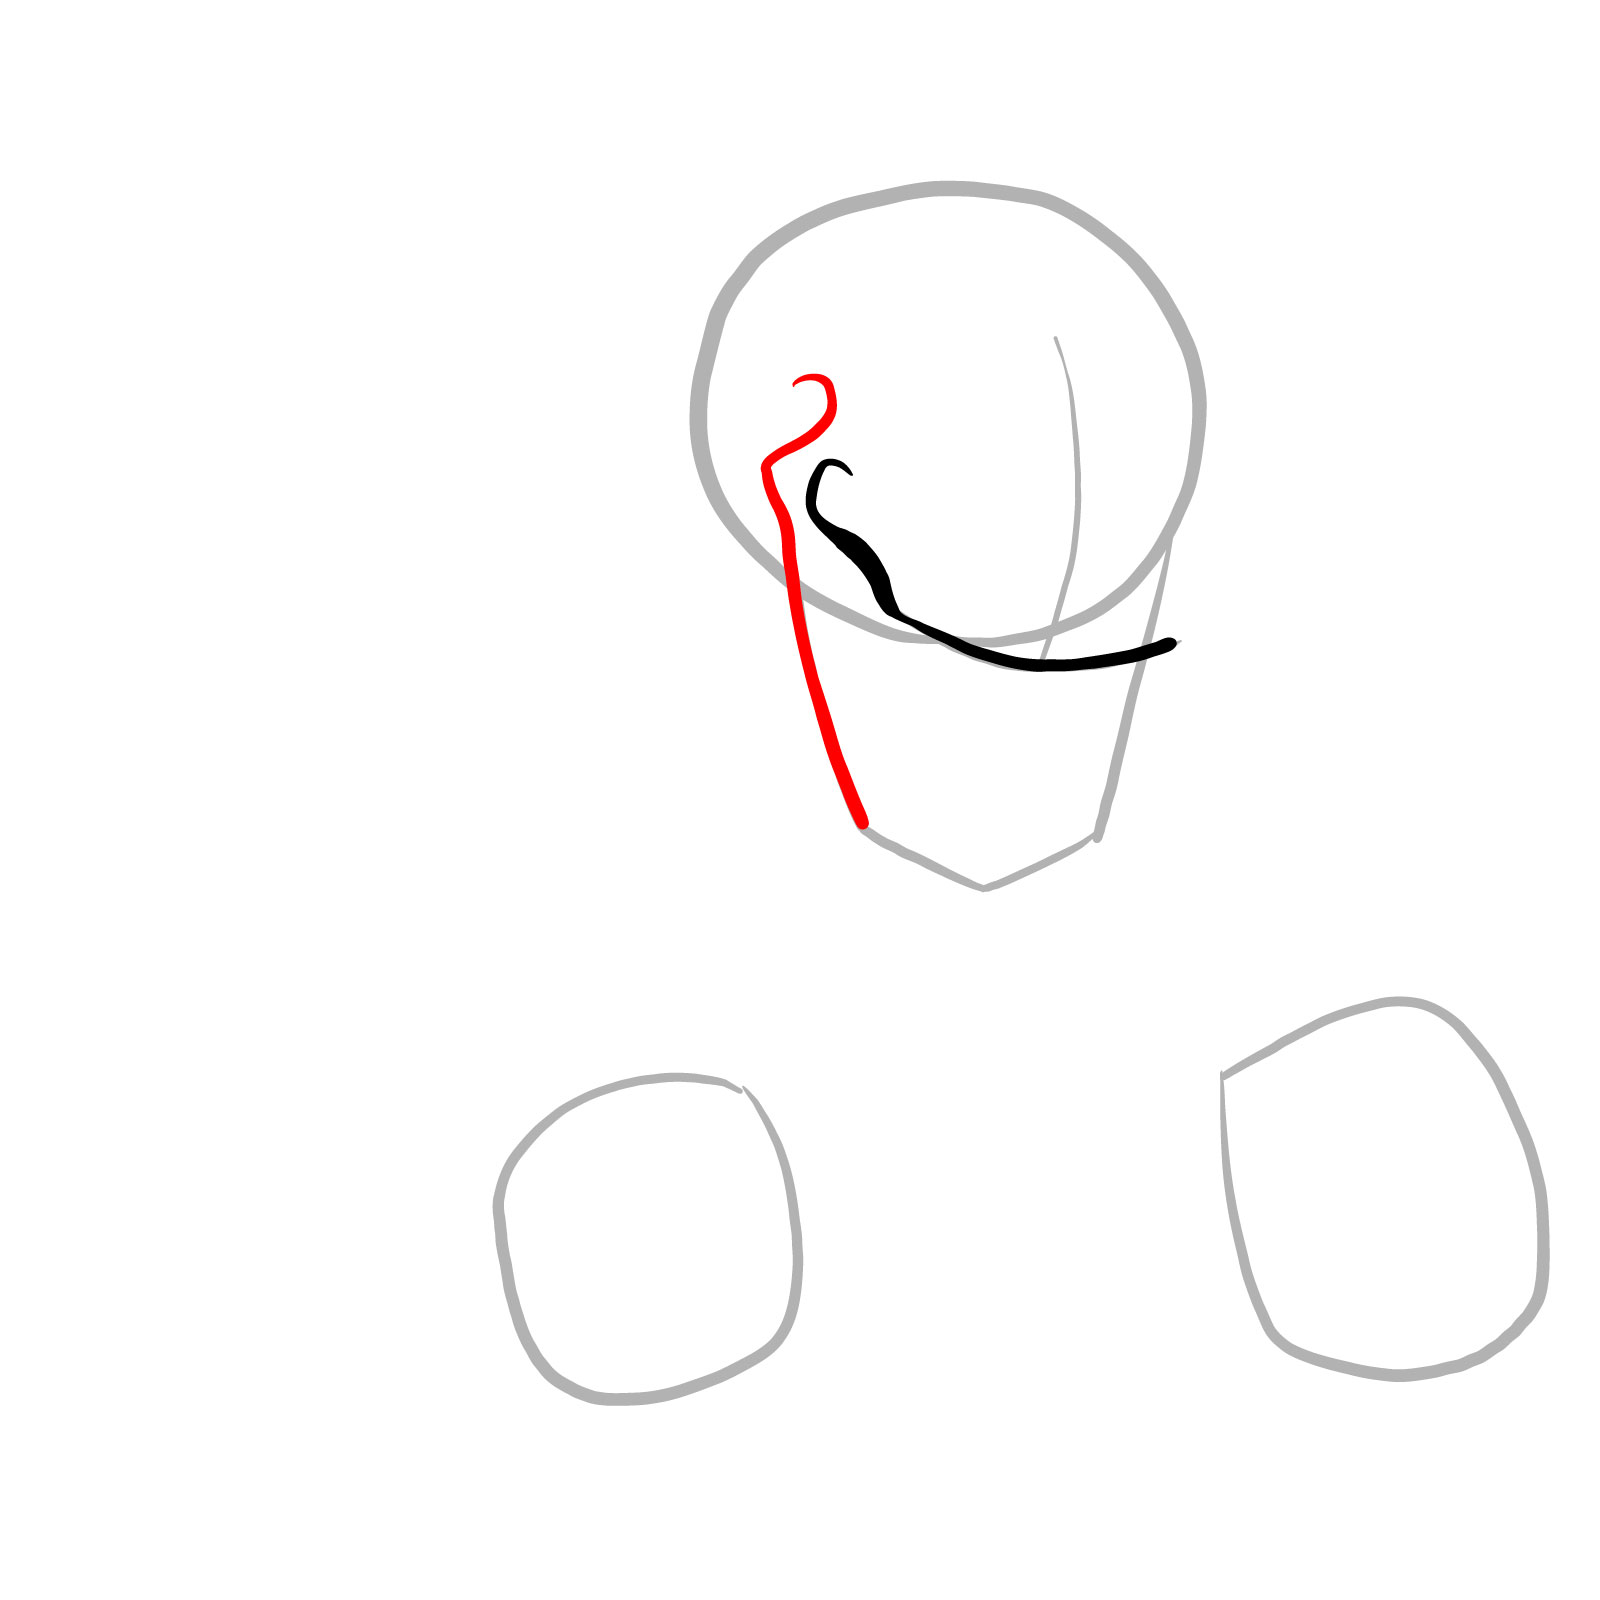 How to draw Phantom!Papyrus from FNF - step 04